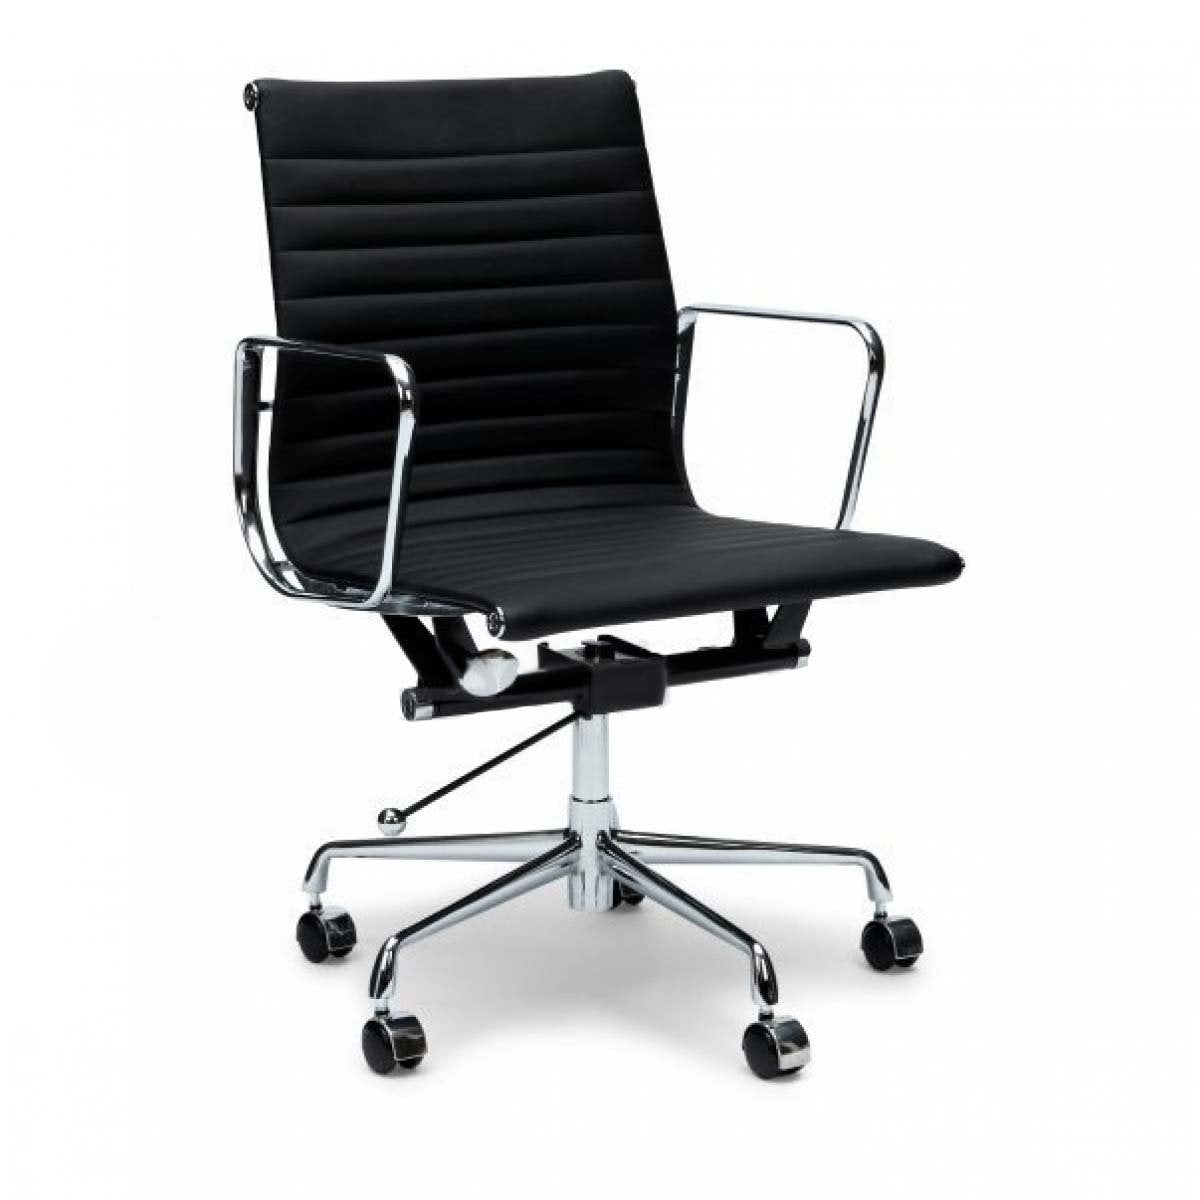 Ellie  Leather Office Chair - Black